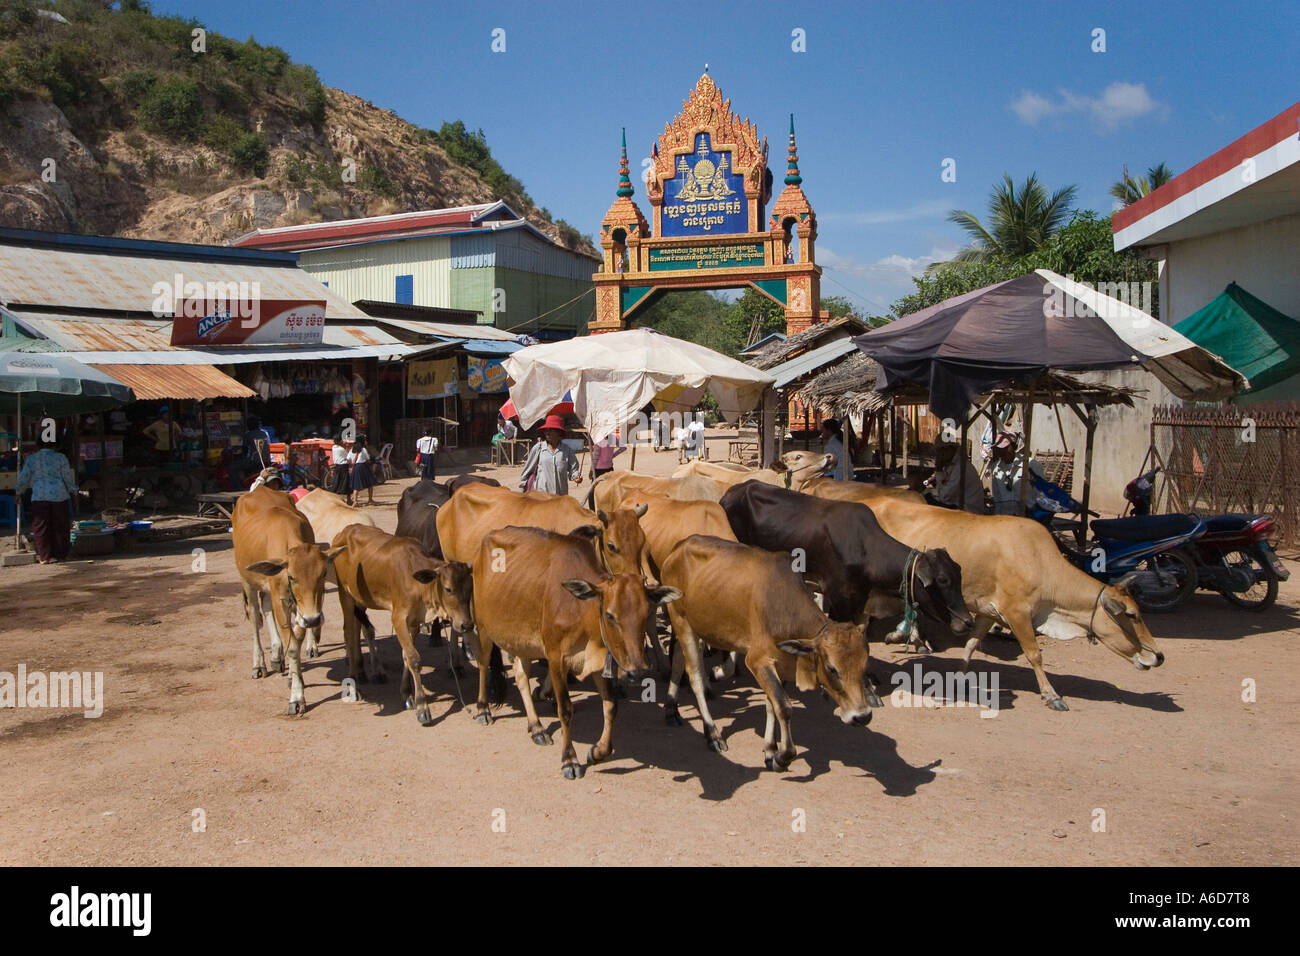 Cattle are herded through the street of a village near Siem Reap Cambodia Stock Photo